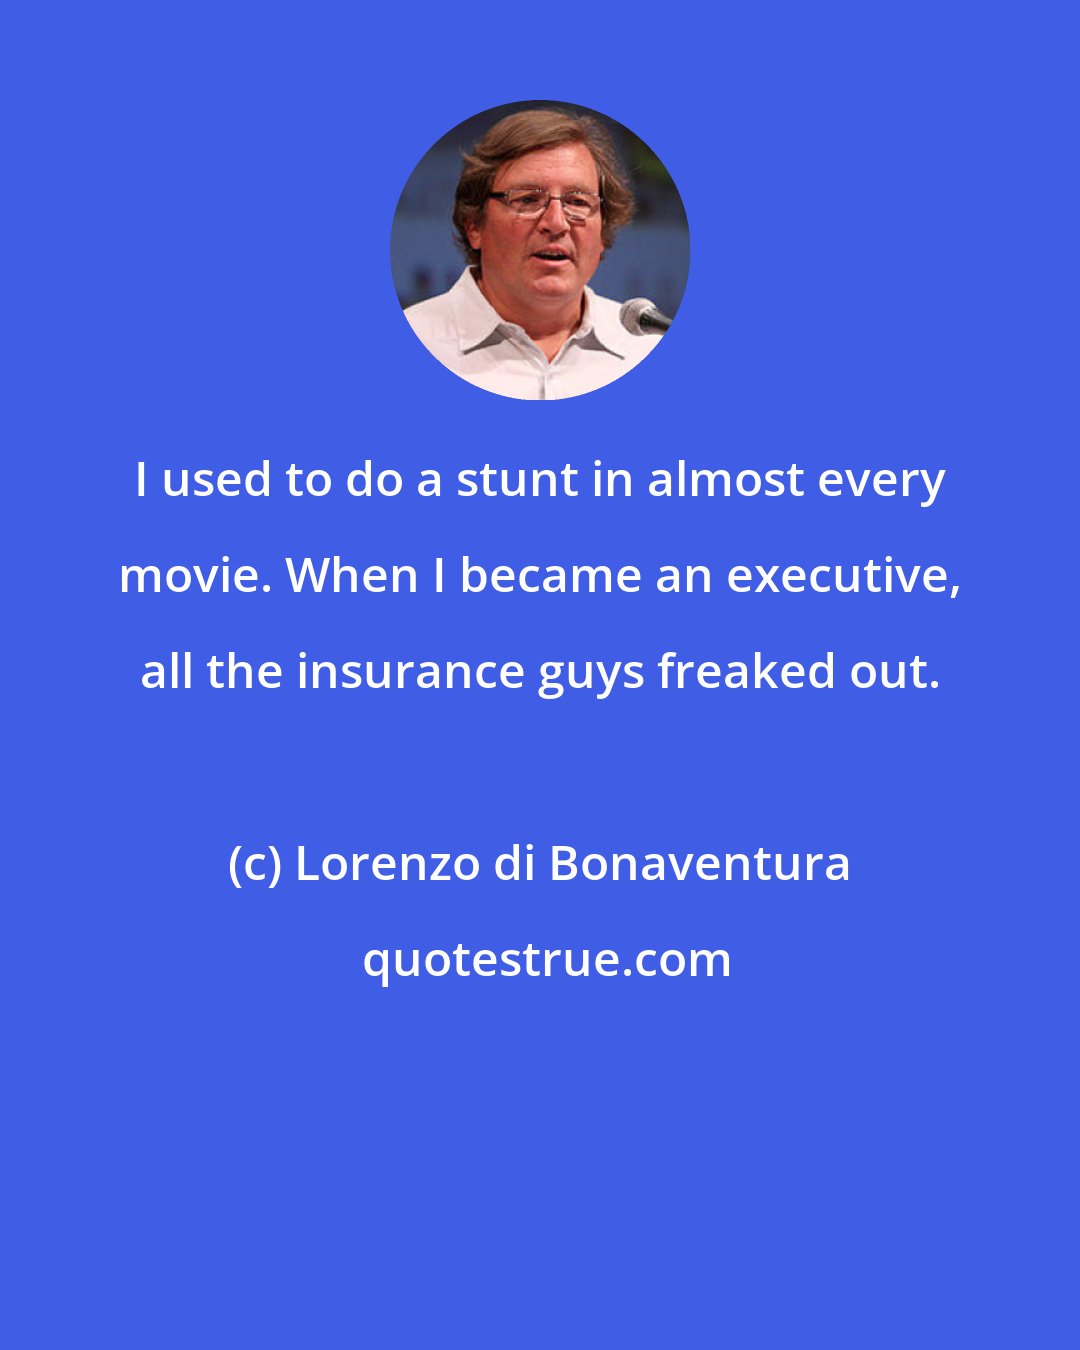 Lorenzo di Bonaventura: I used to do a stunt in almost every movie. When I became an executive, all the insurance guys freaked out.